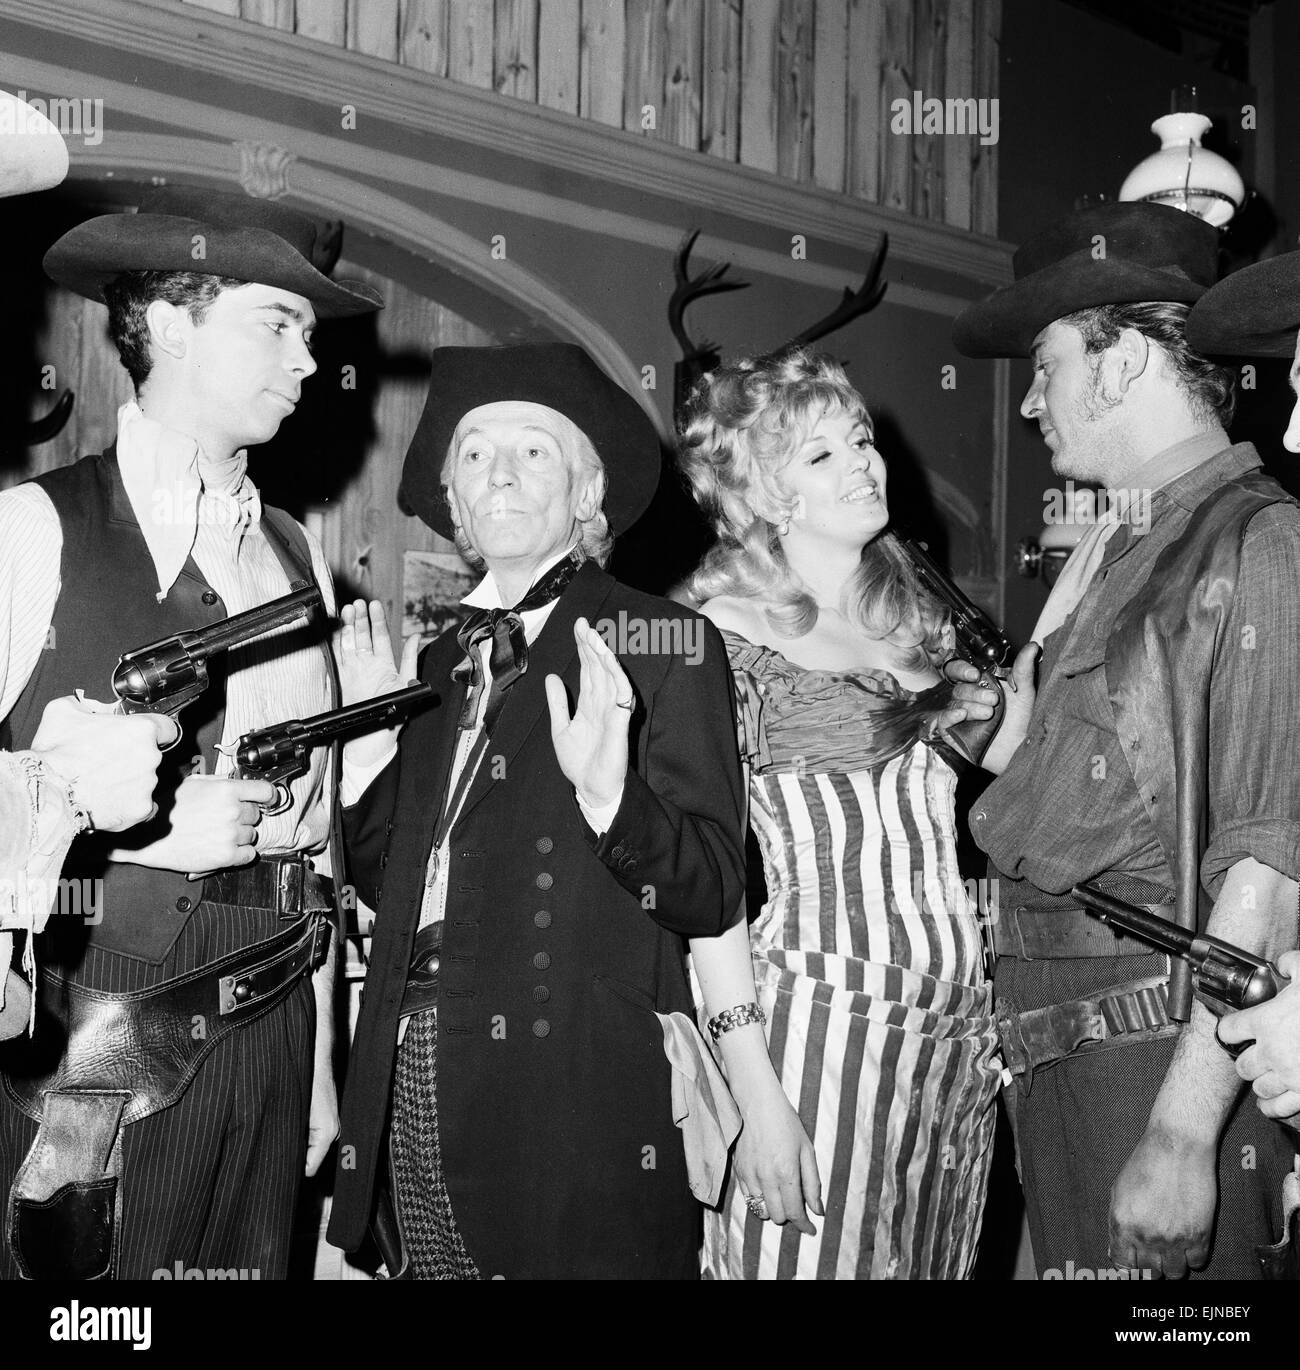 Actors rehearse for new Dr Who Story - The Gunfighters - at BBC Television Centre London 22nd April 1966. Pictured: William Hartnell - the first doctor & Sheena Marsh who plays Kate, pictured in a hold up scene in a Western Saloon Bar. *** Local Caption *** Dr WhoDr Who - - 13/08/2010 Stock Photo